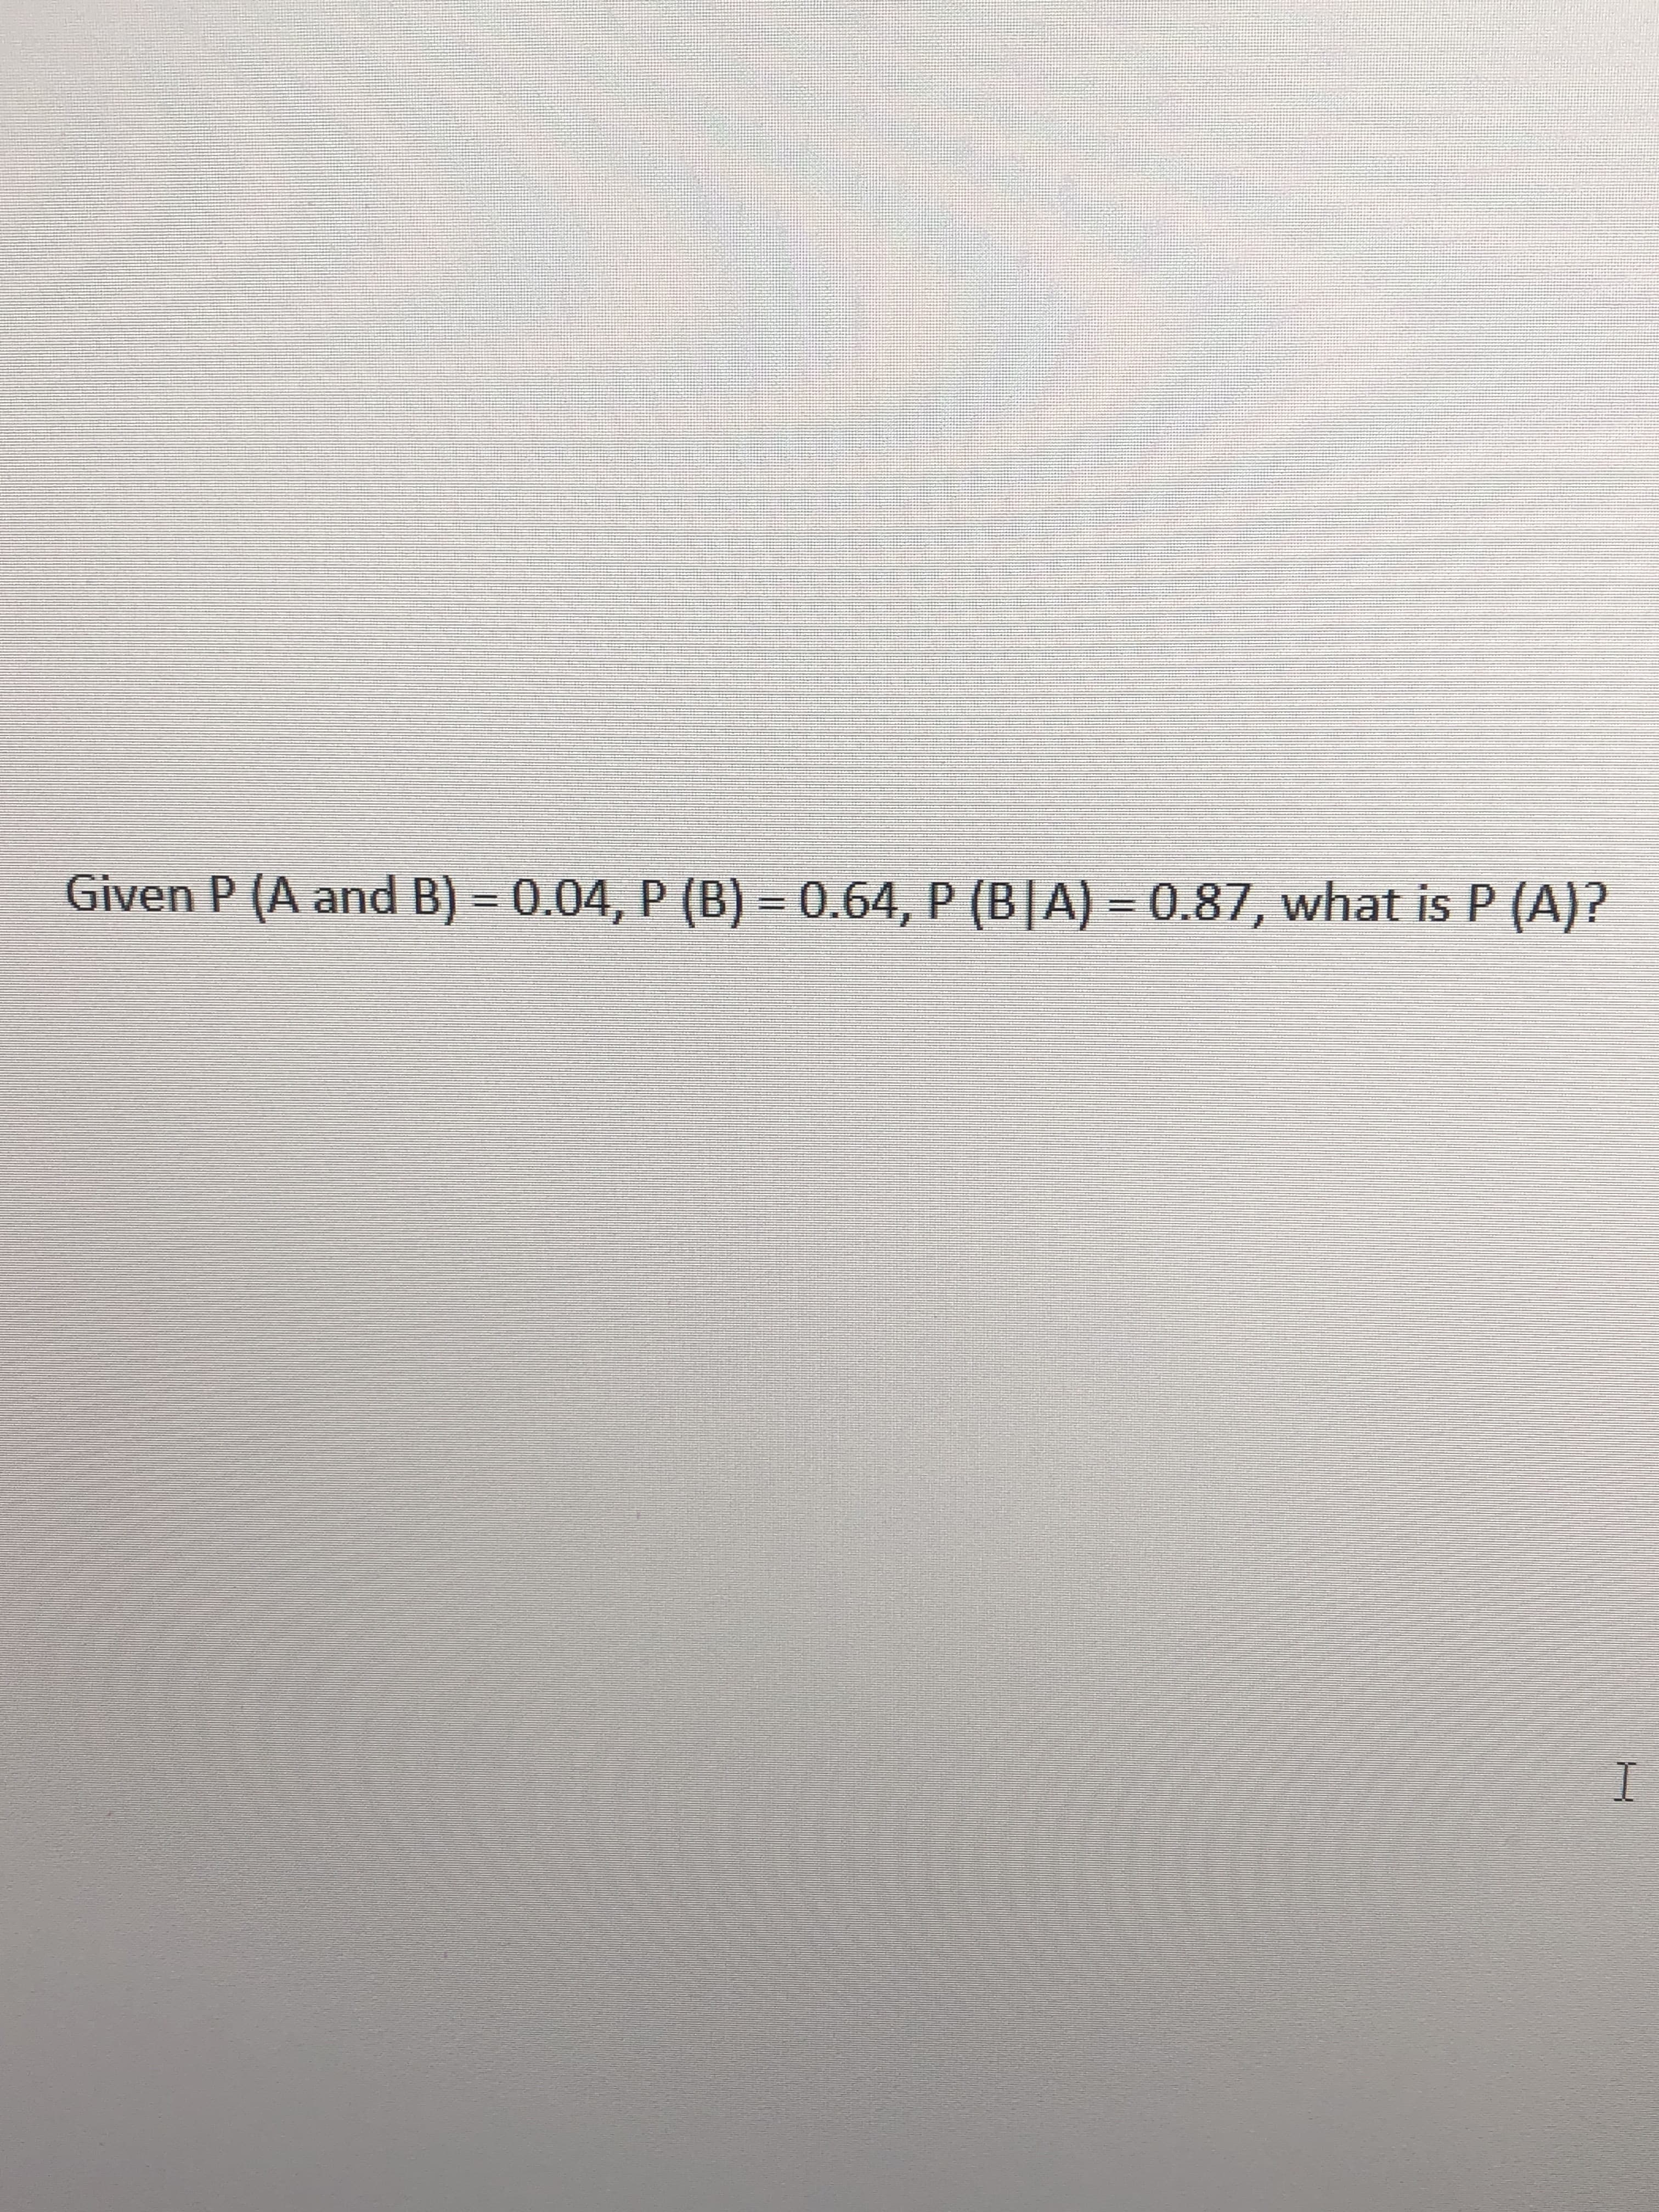 Given P (A and B) 0
0.04, P (B) 0.64, P (B|A) 0.87, what is P (A)?
